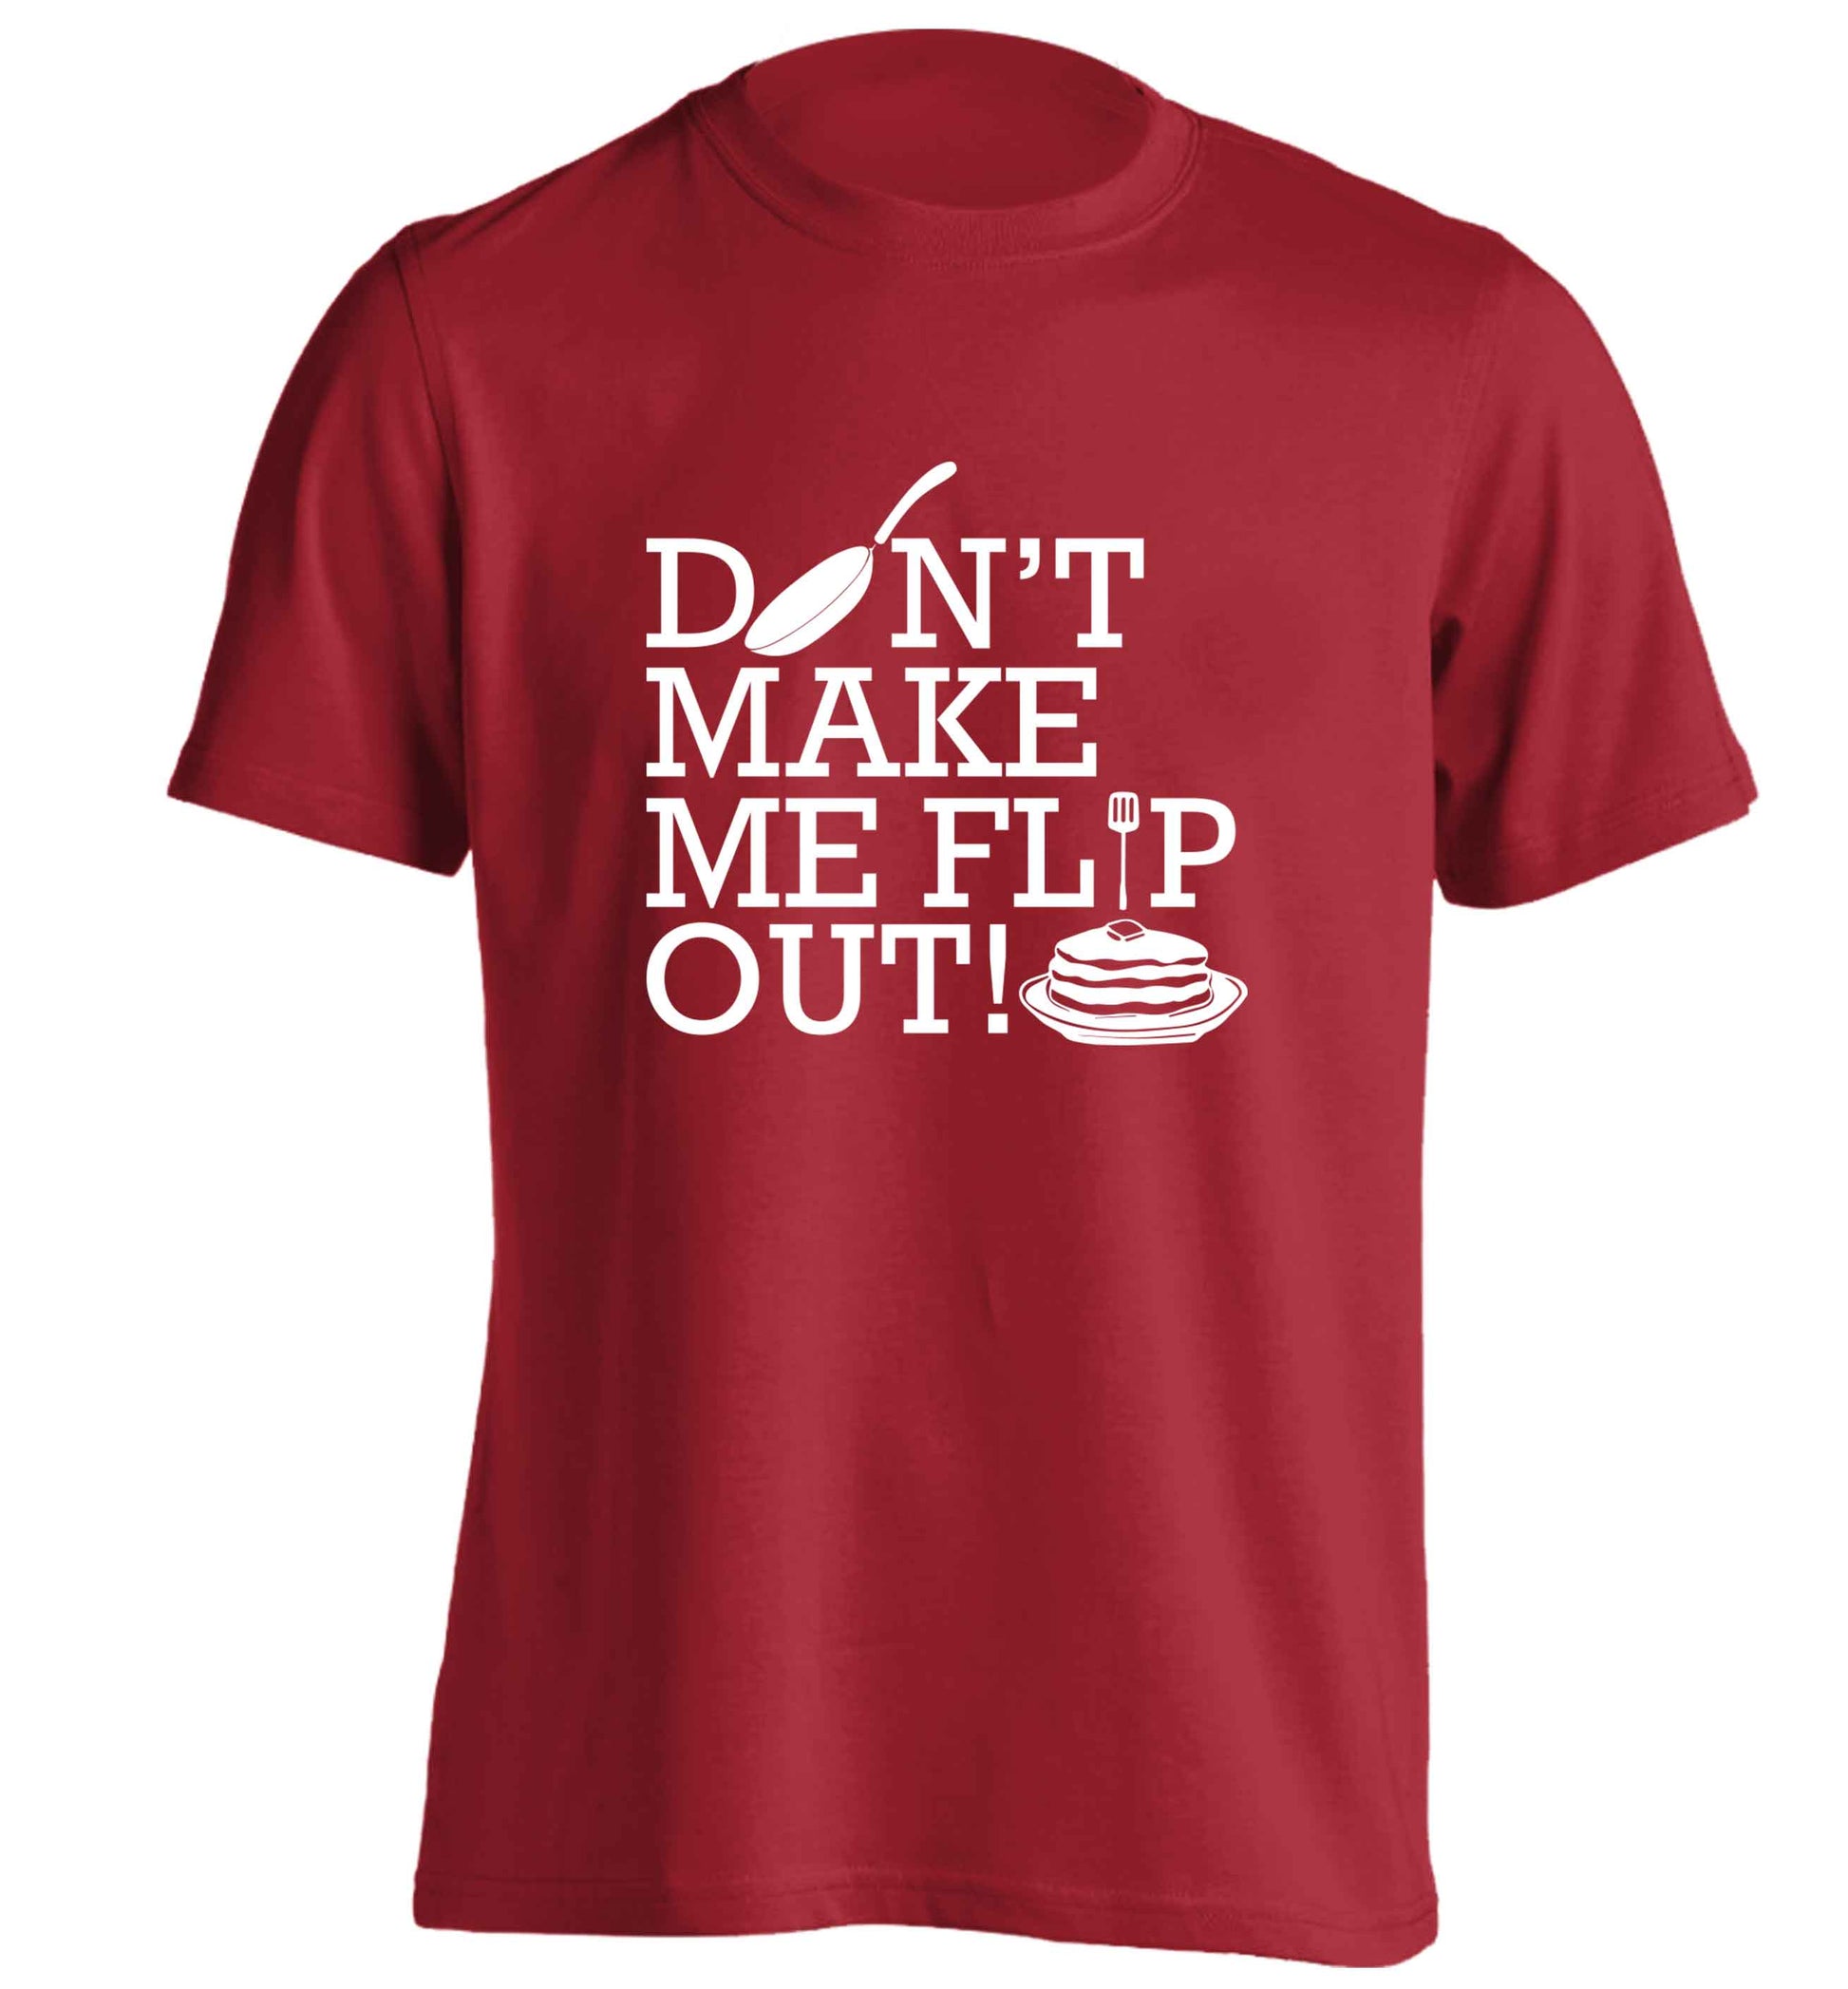 Don't make me flip out adults unisex red Tshirt 2XL